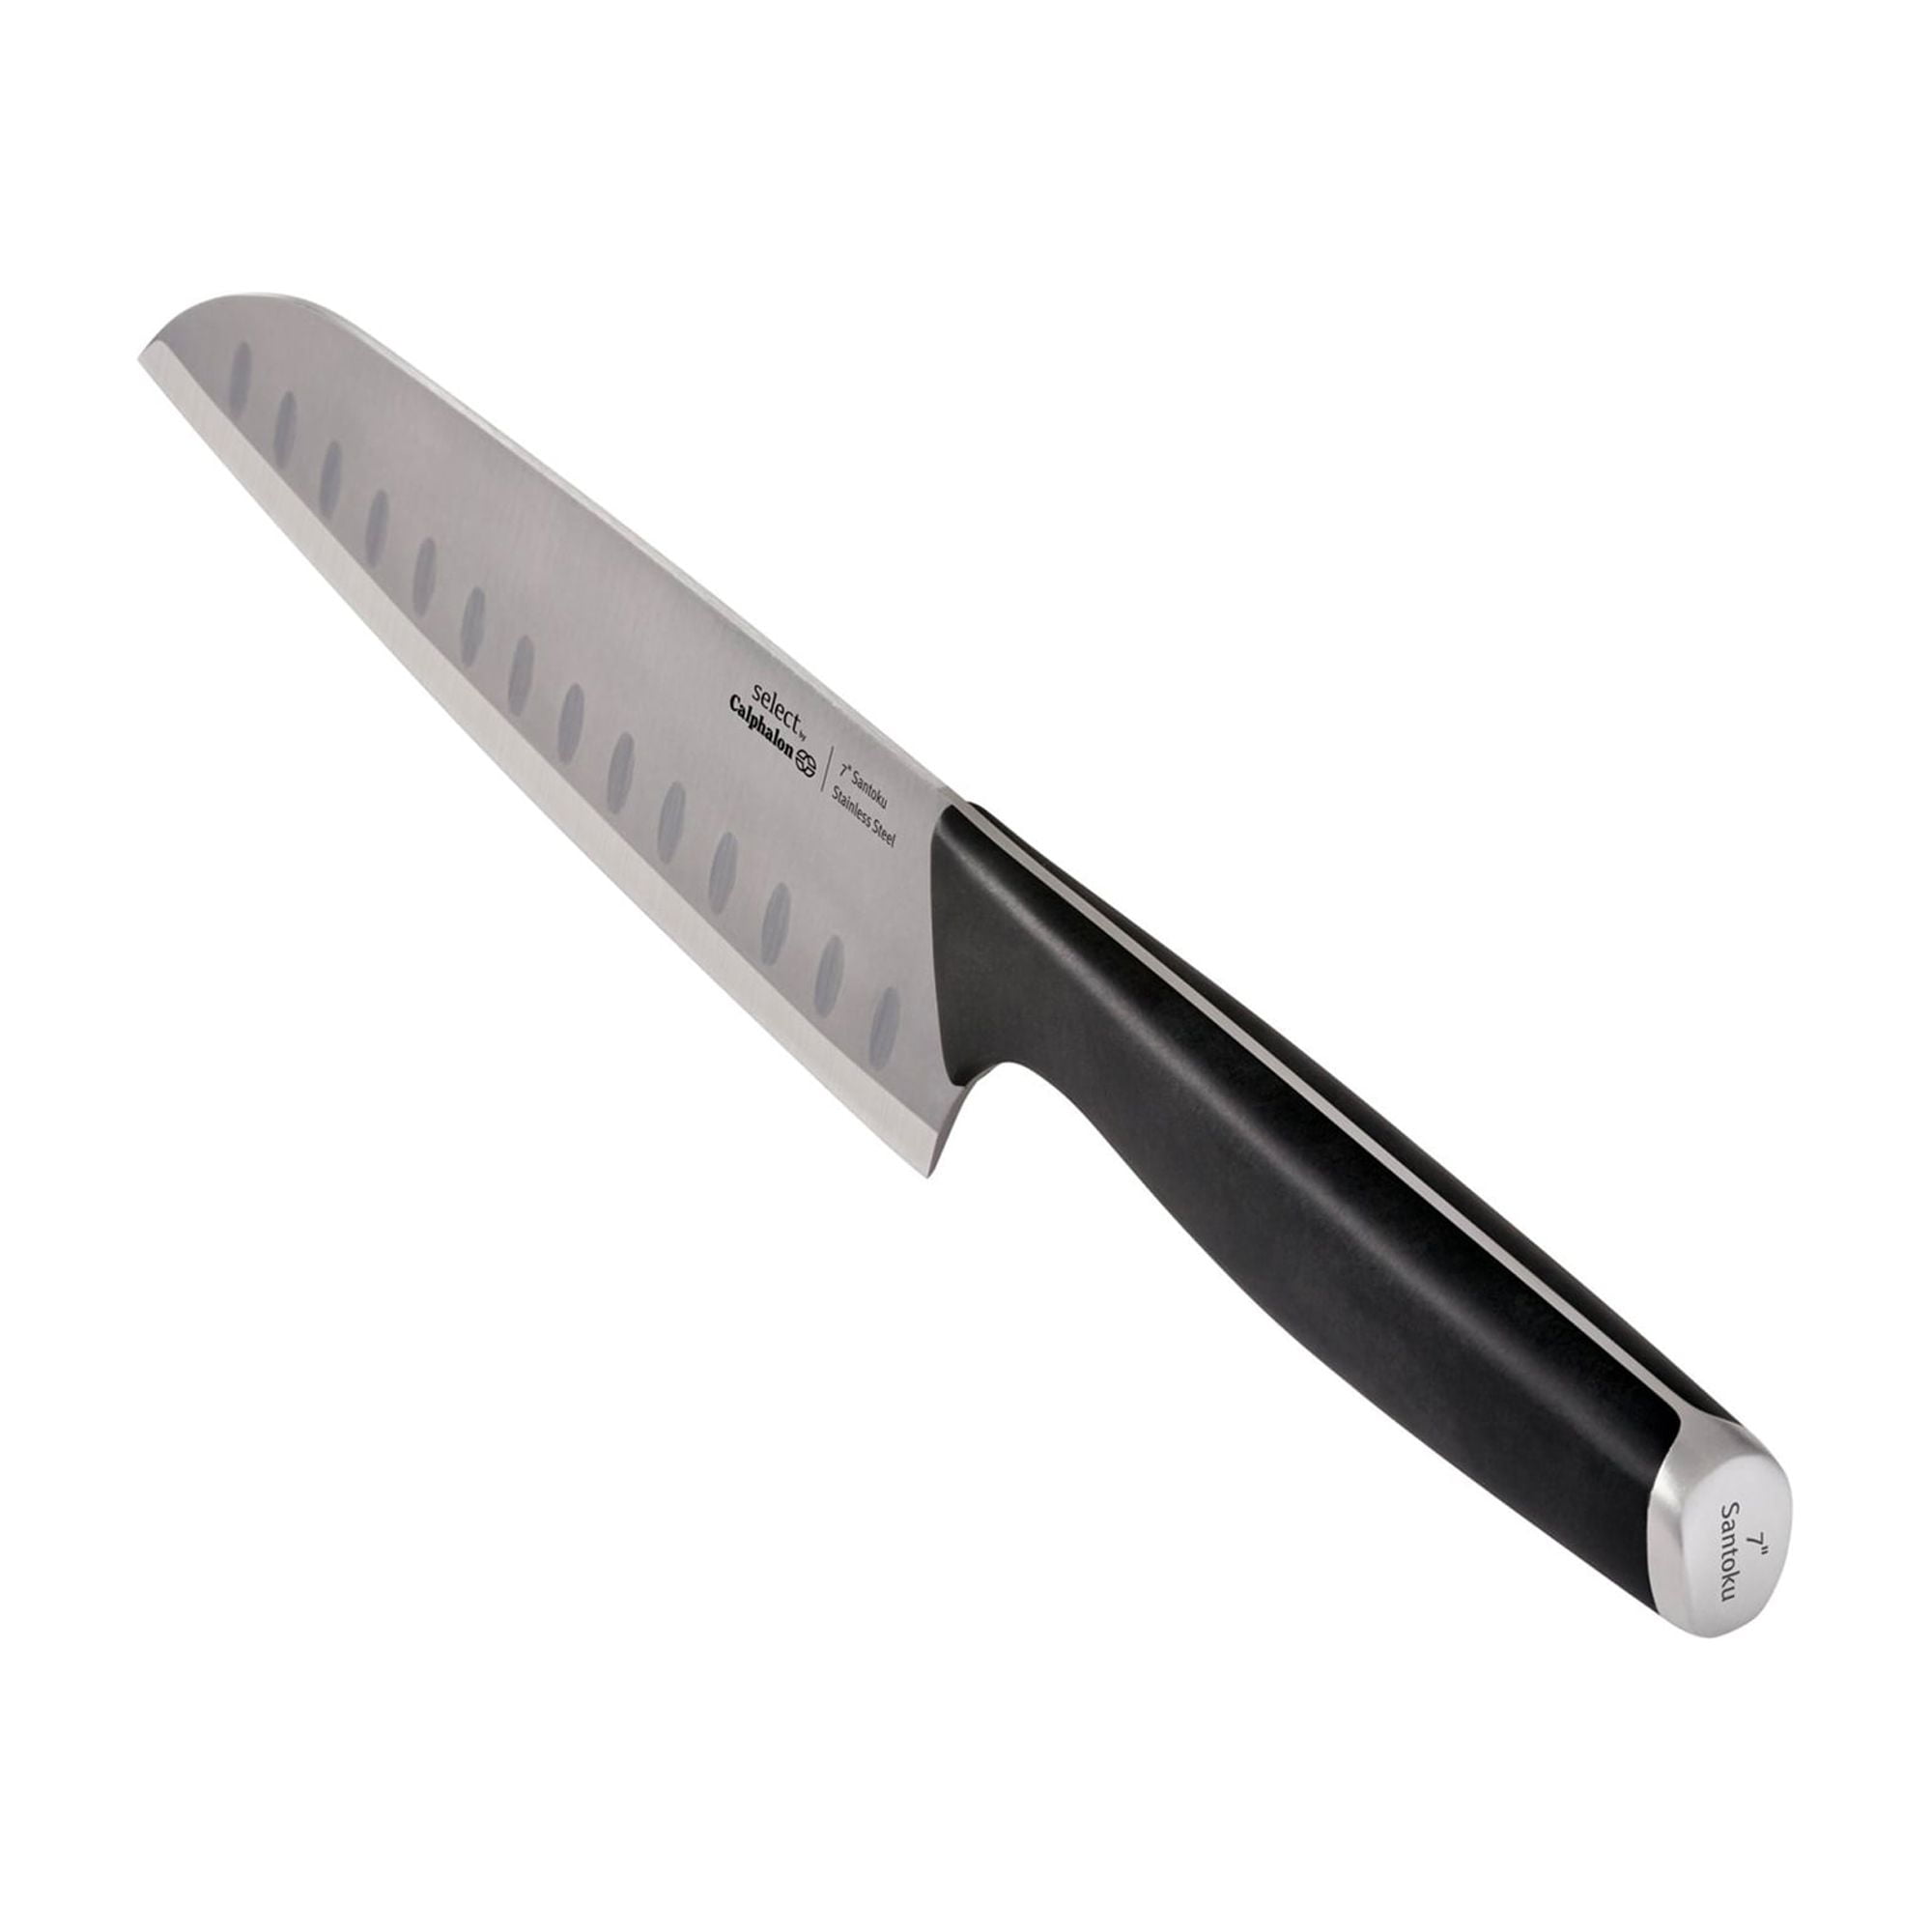 Calphalon Knife Recall: What You Need to Know